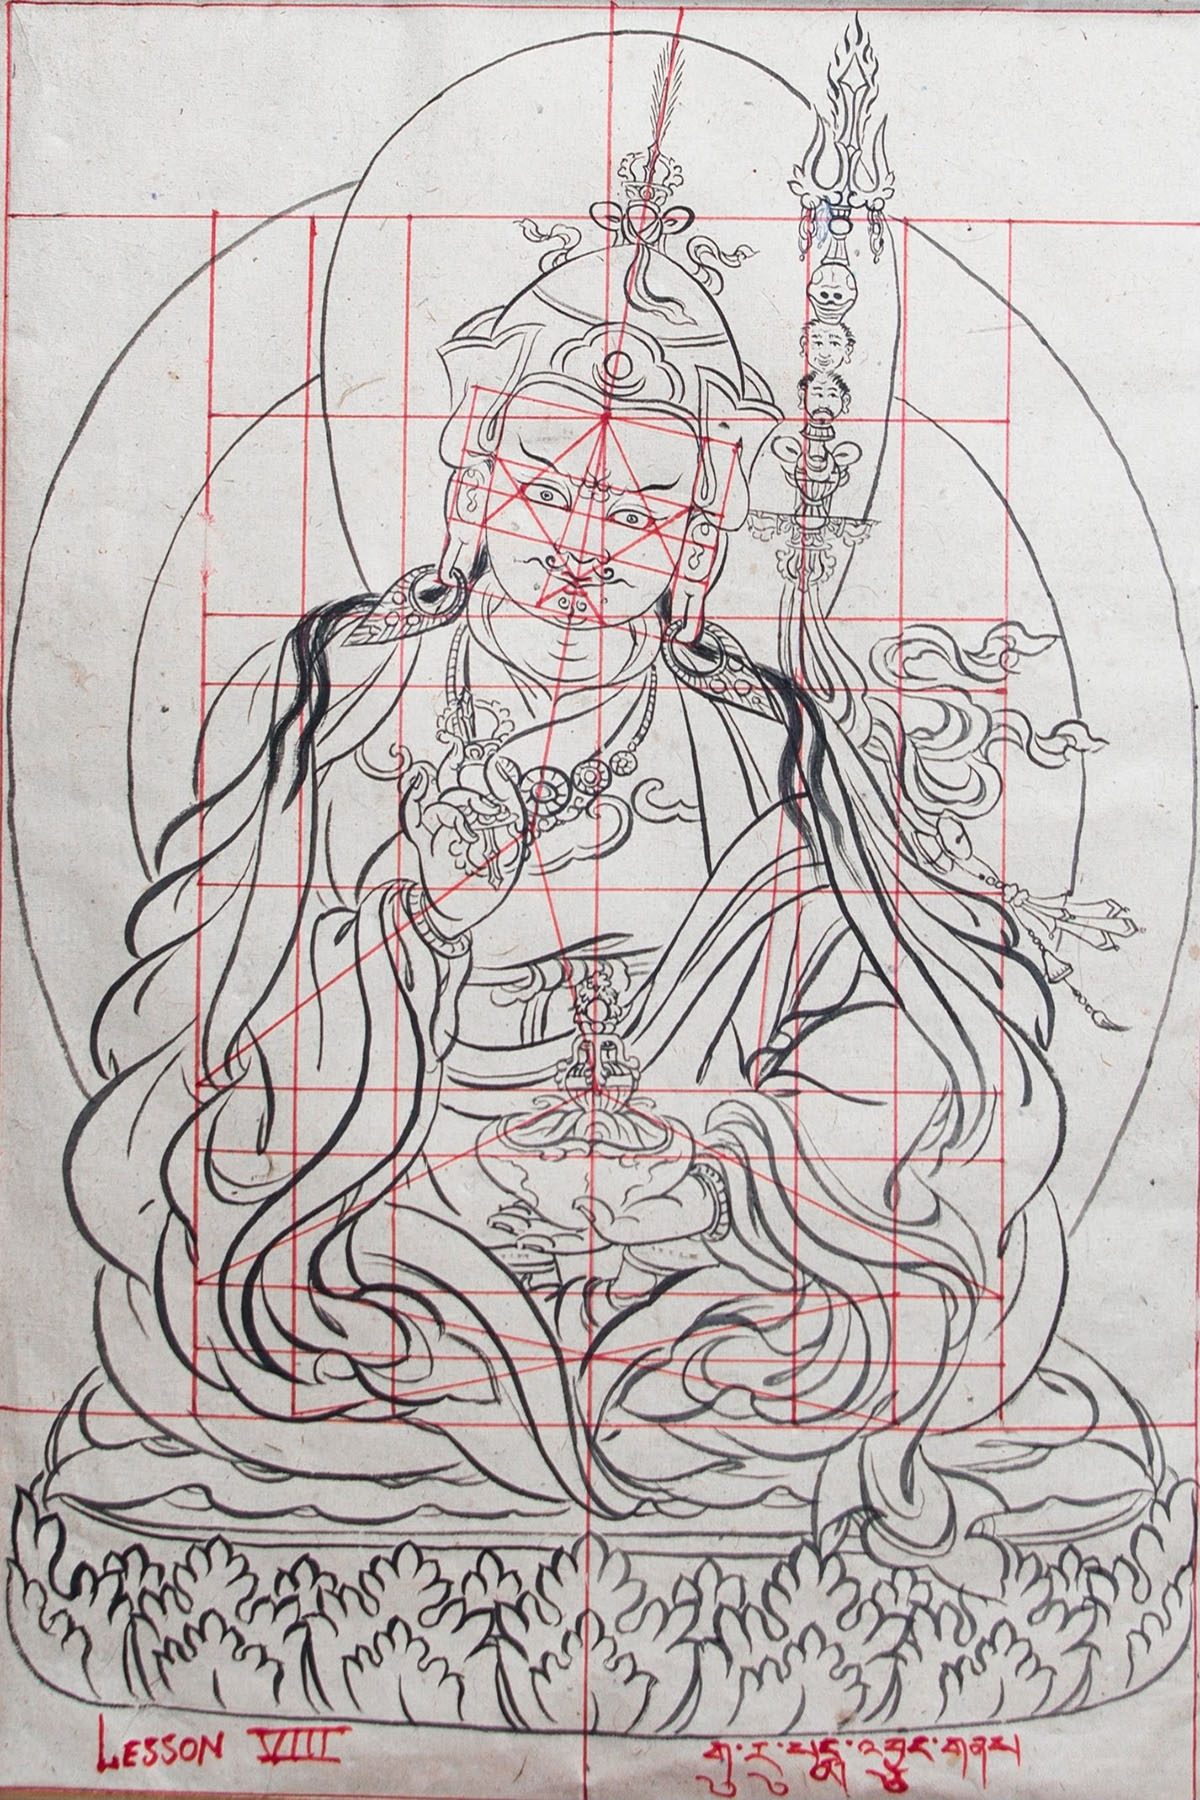 A preparatory drawing for a thangka made on paper depicting a Buddhist deity drawn on a square grid.